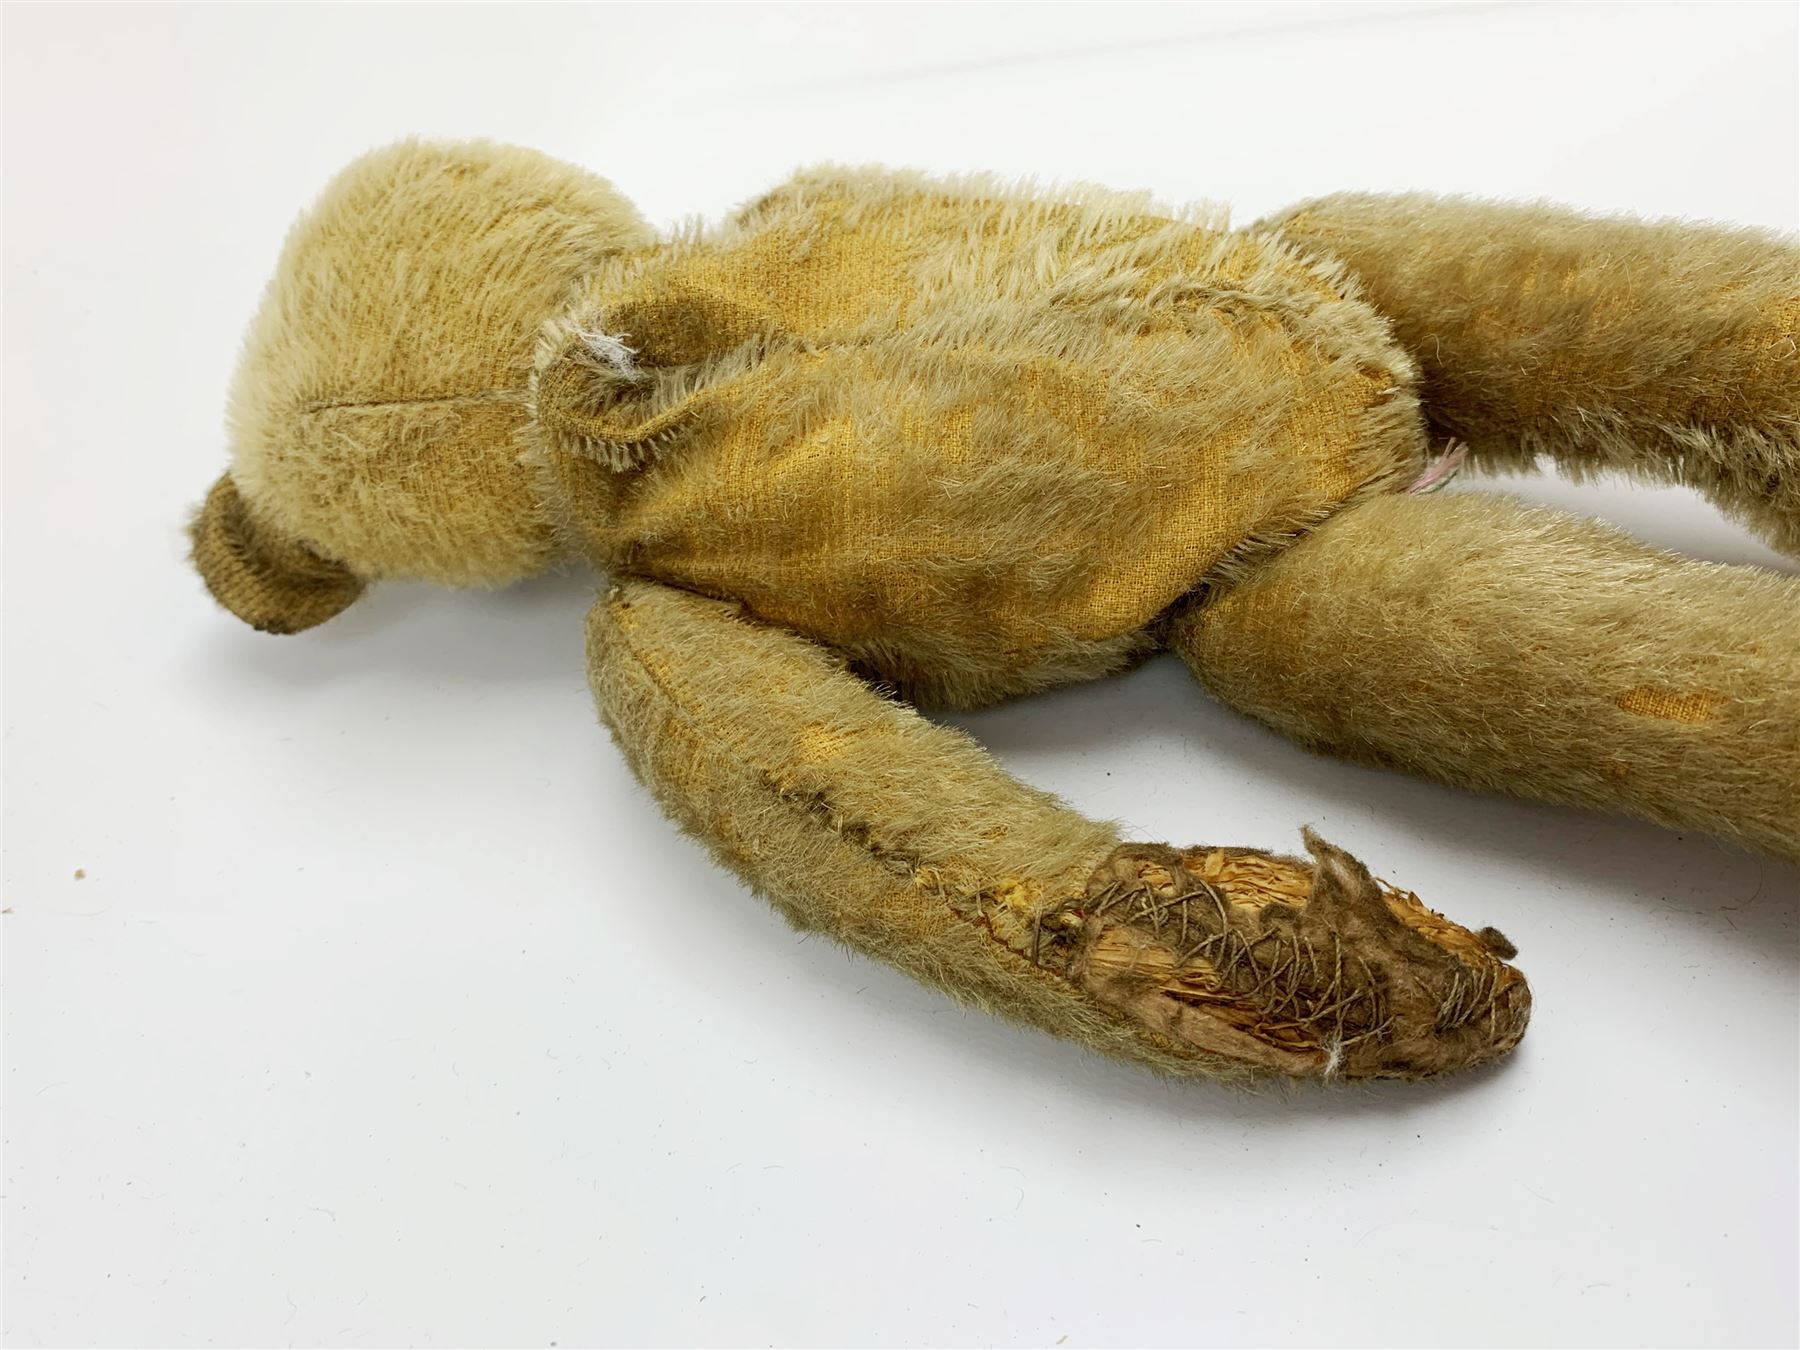 Early 20th century American mohair teddy bear c1920 with wood wool filled body humped back body with - Image 6 of 8